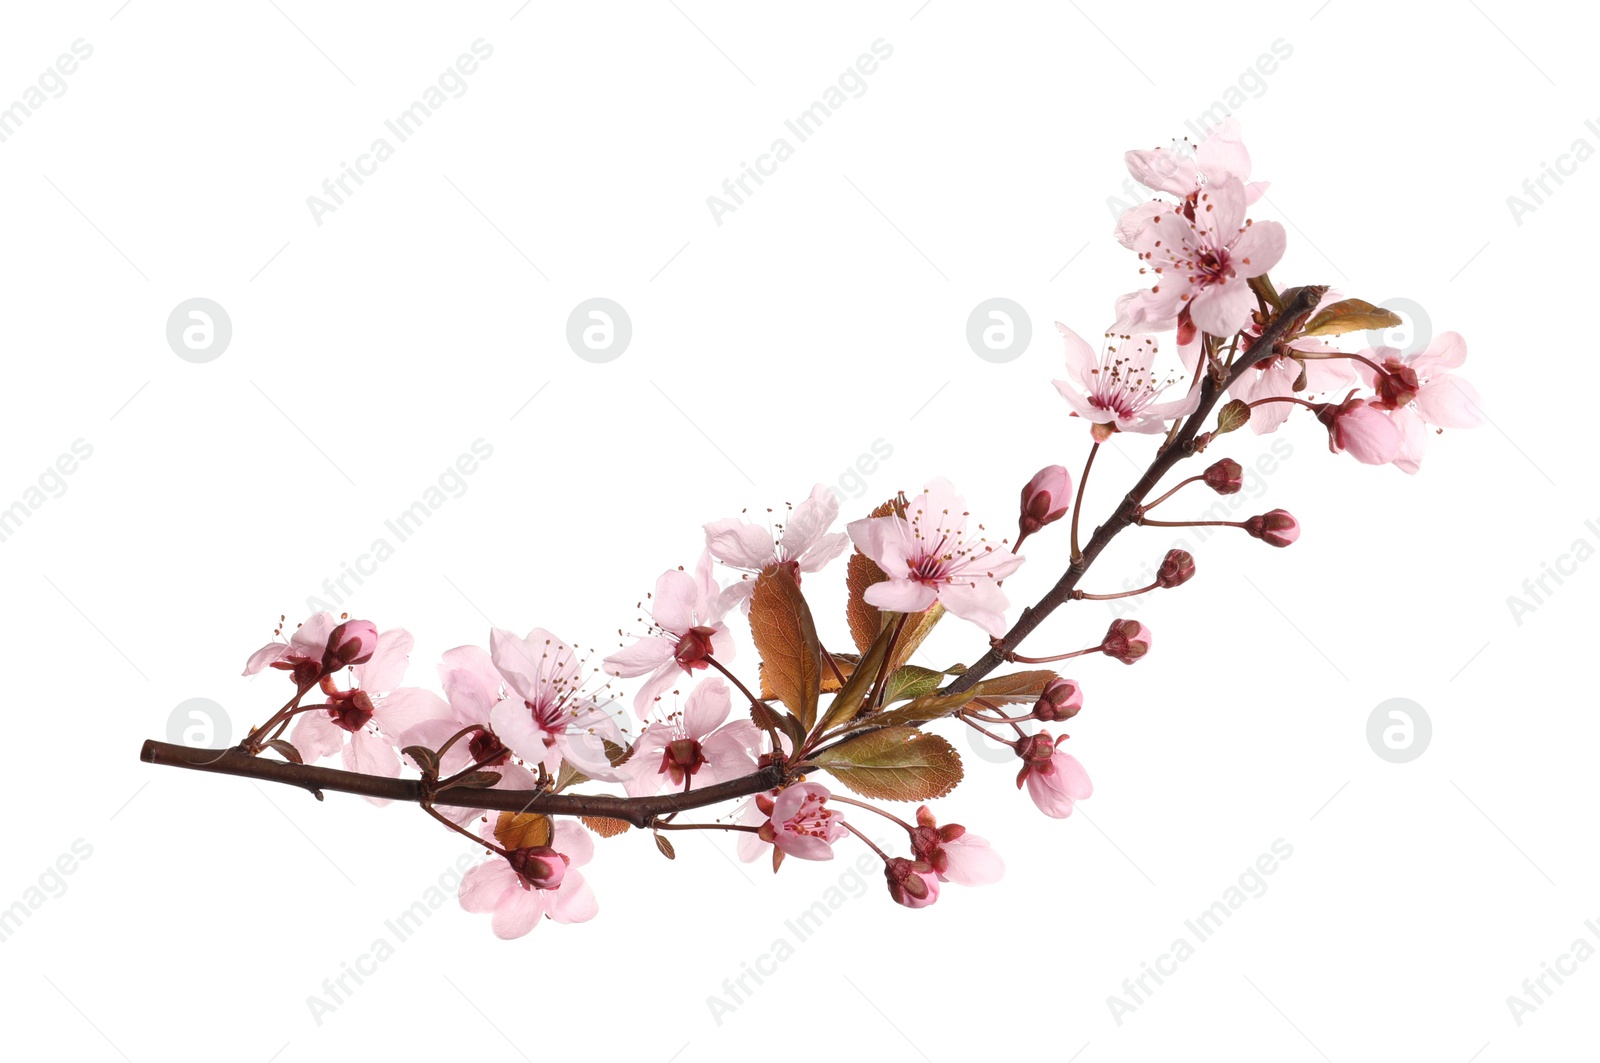 Photo of Sakura tree branch with beautiful pink blossoms isolated on white